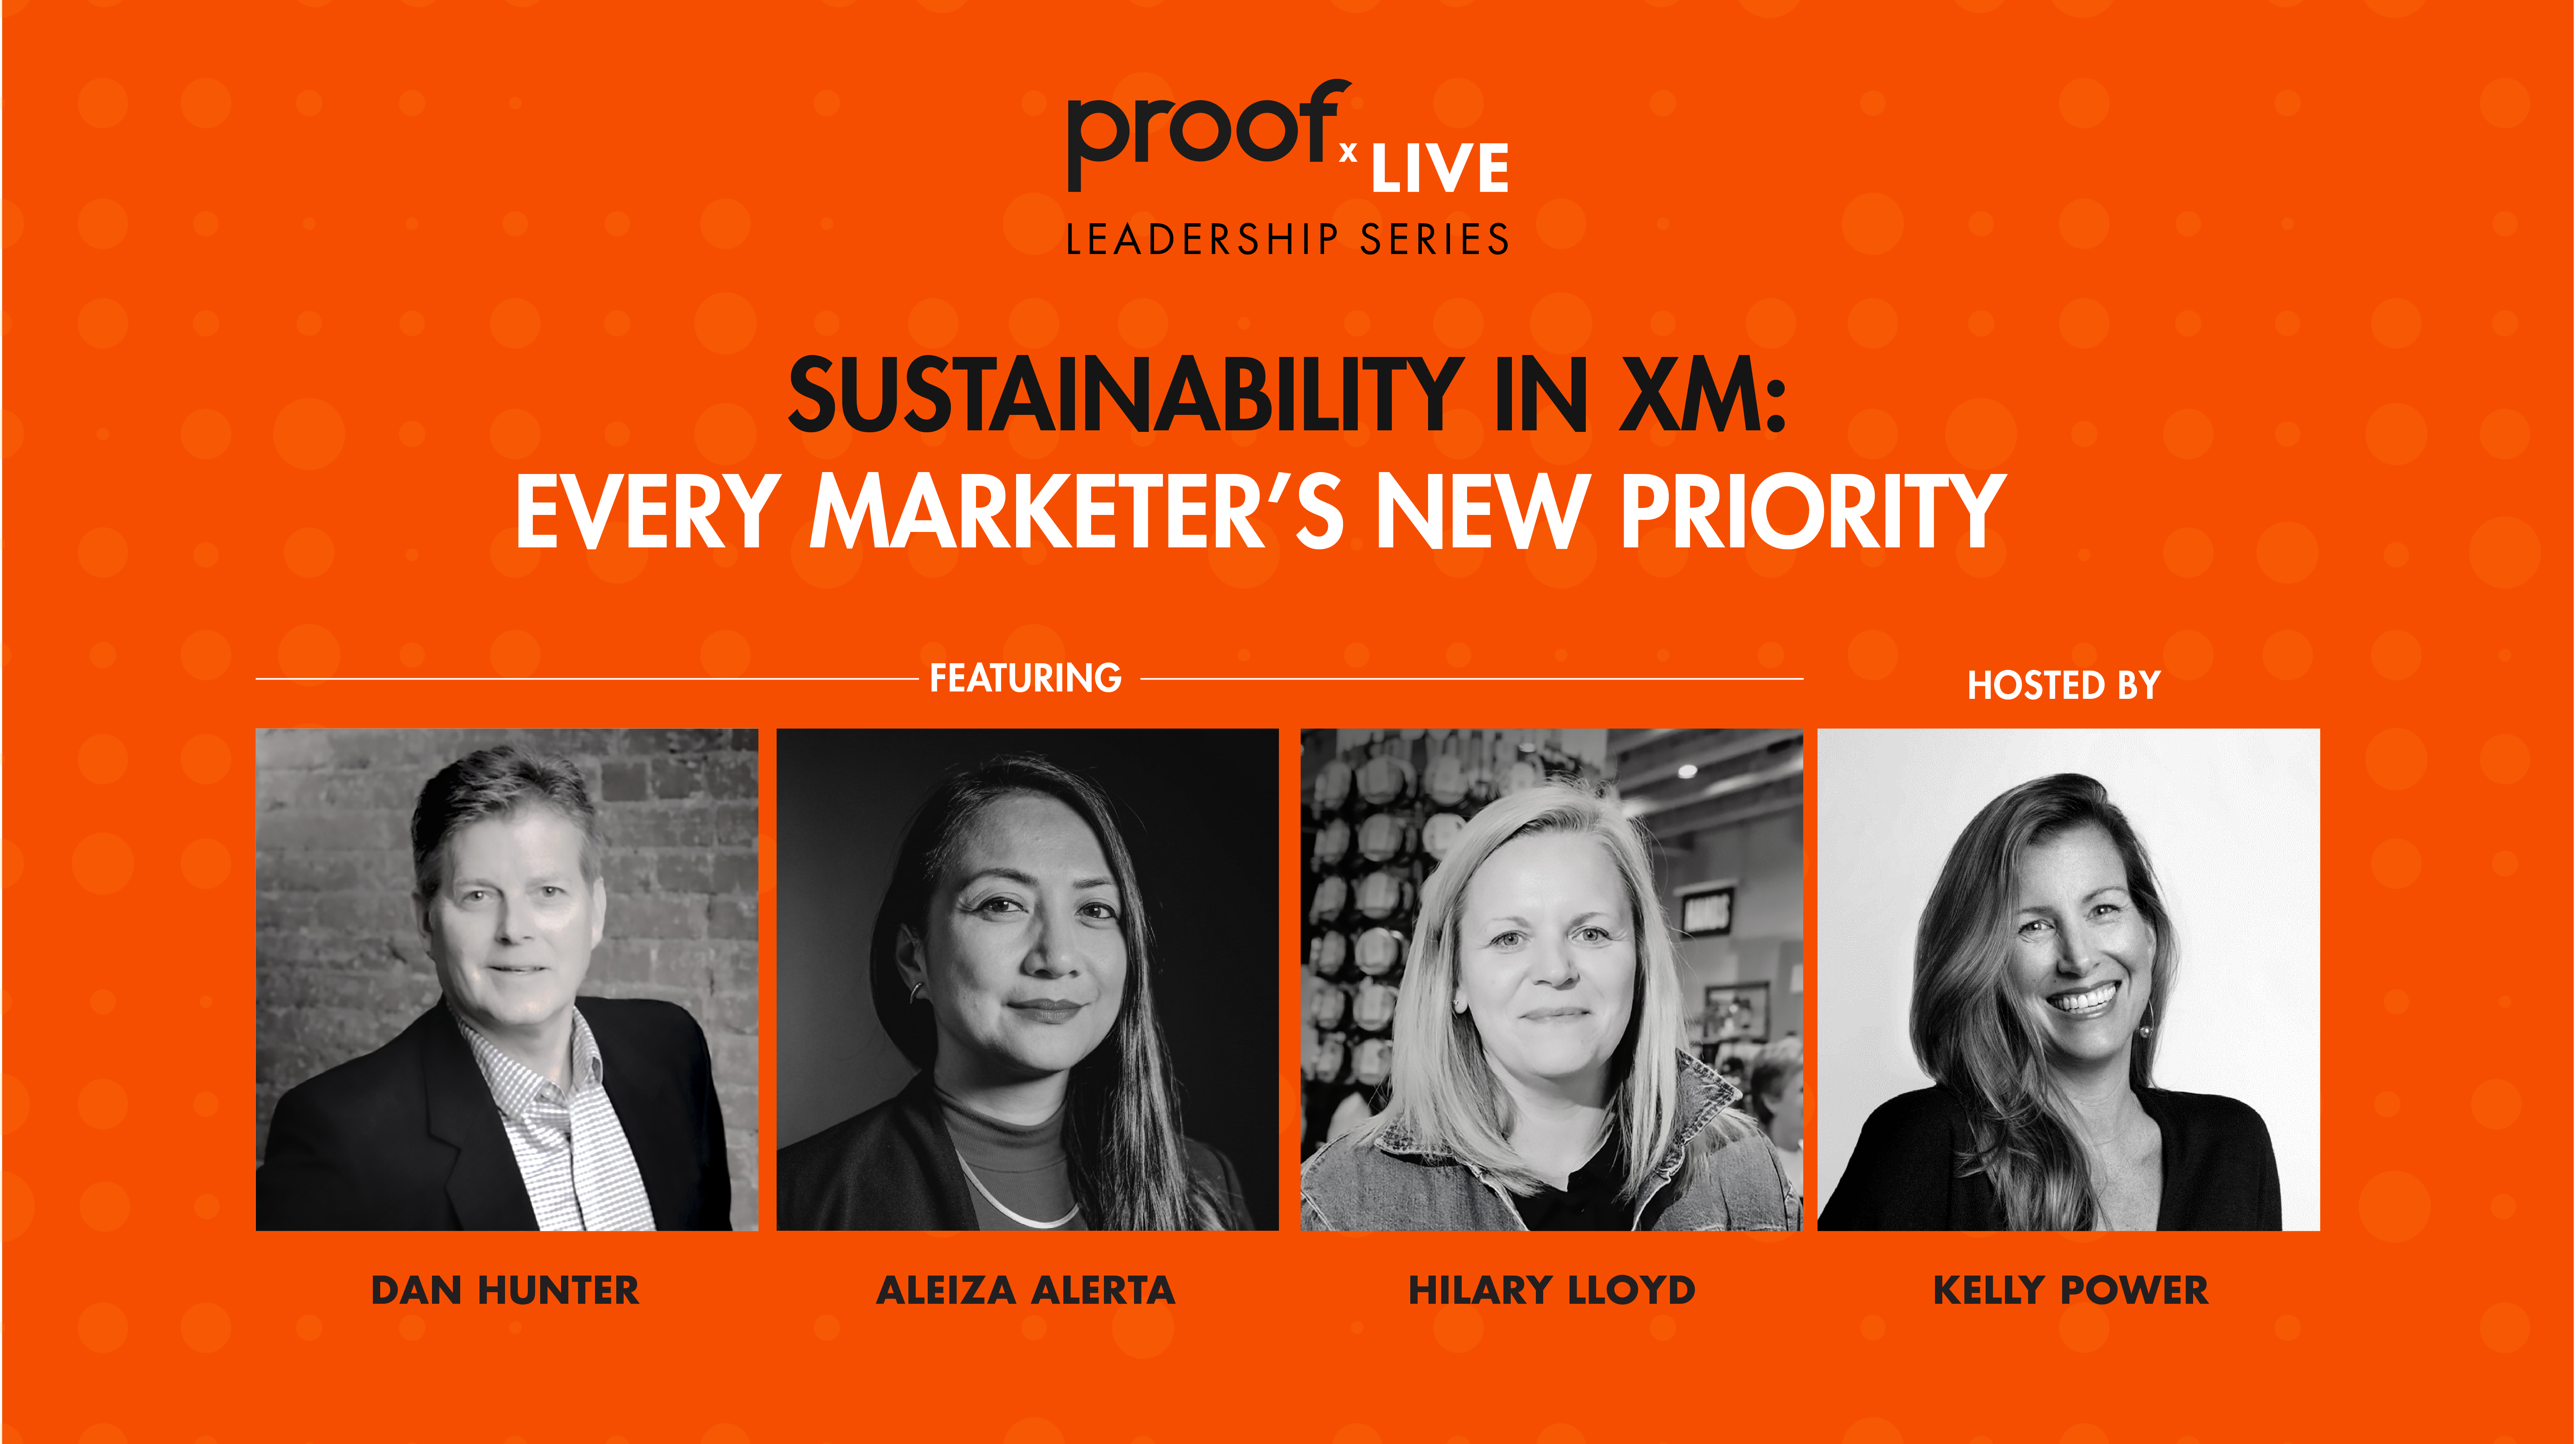 SUSTAINABILITY IN XM: Every Marketer’s New